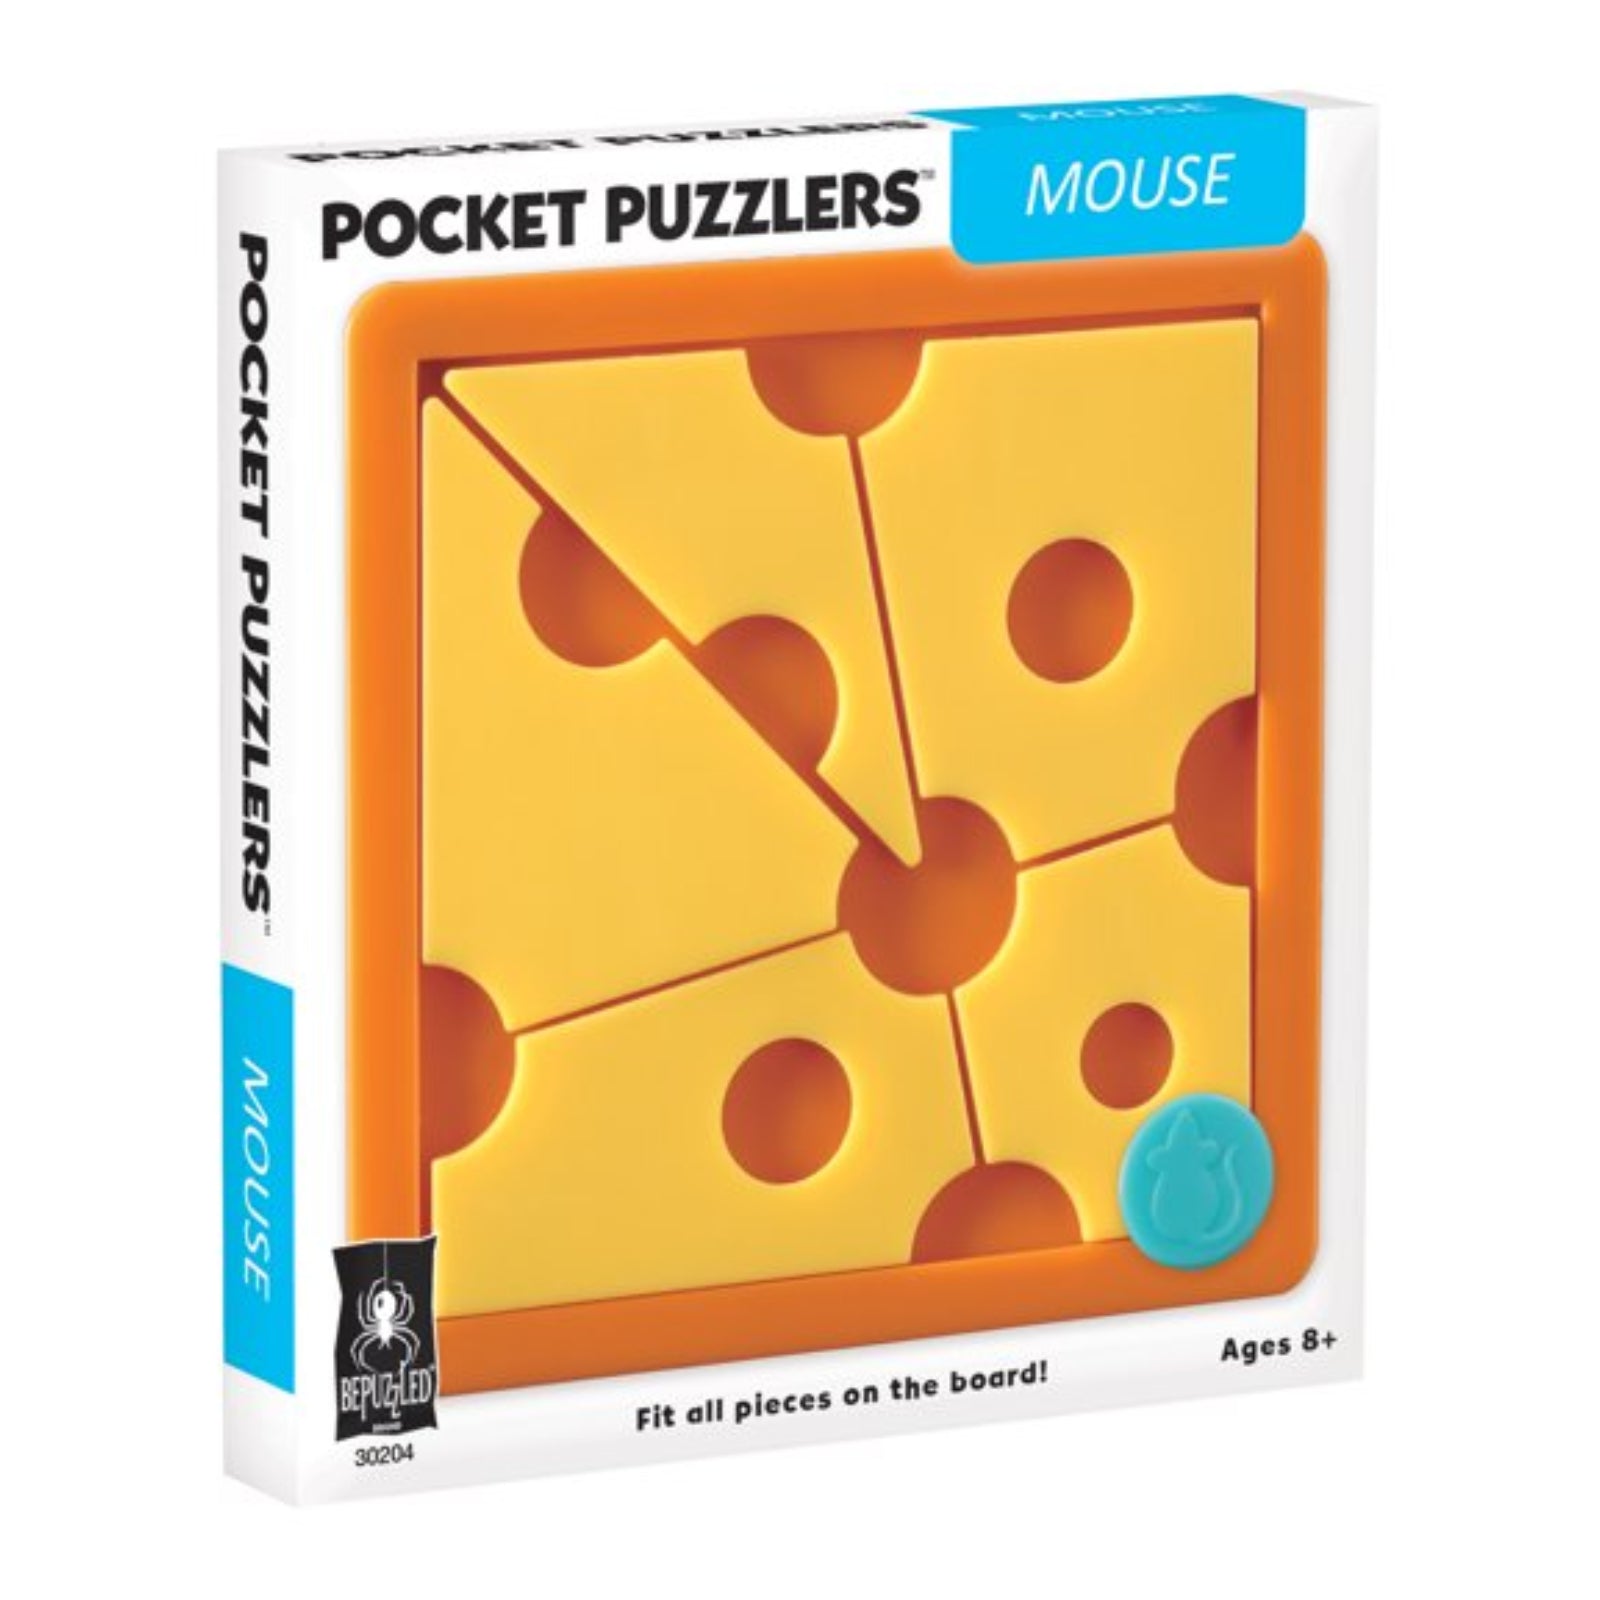 Pocket Puzzlers - Mouse - Bepuzzled